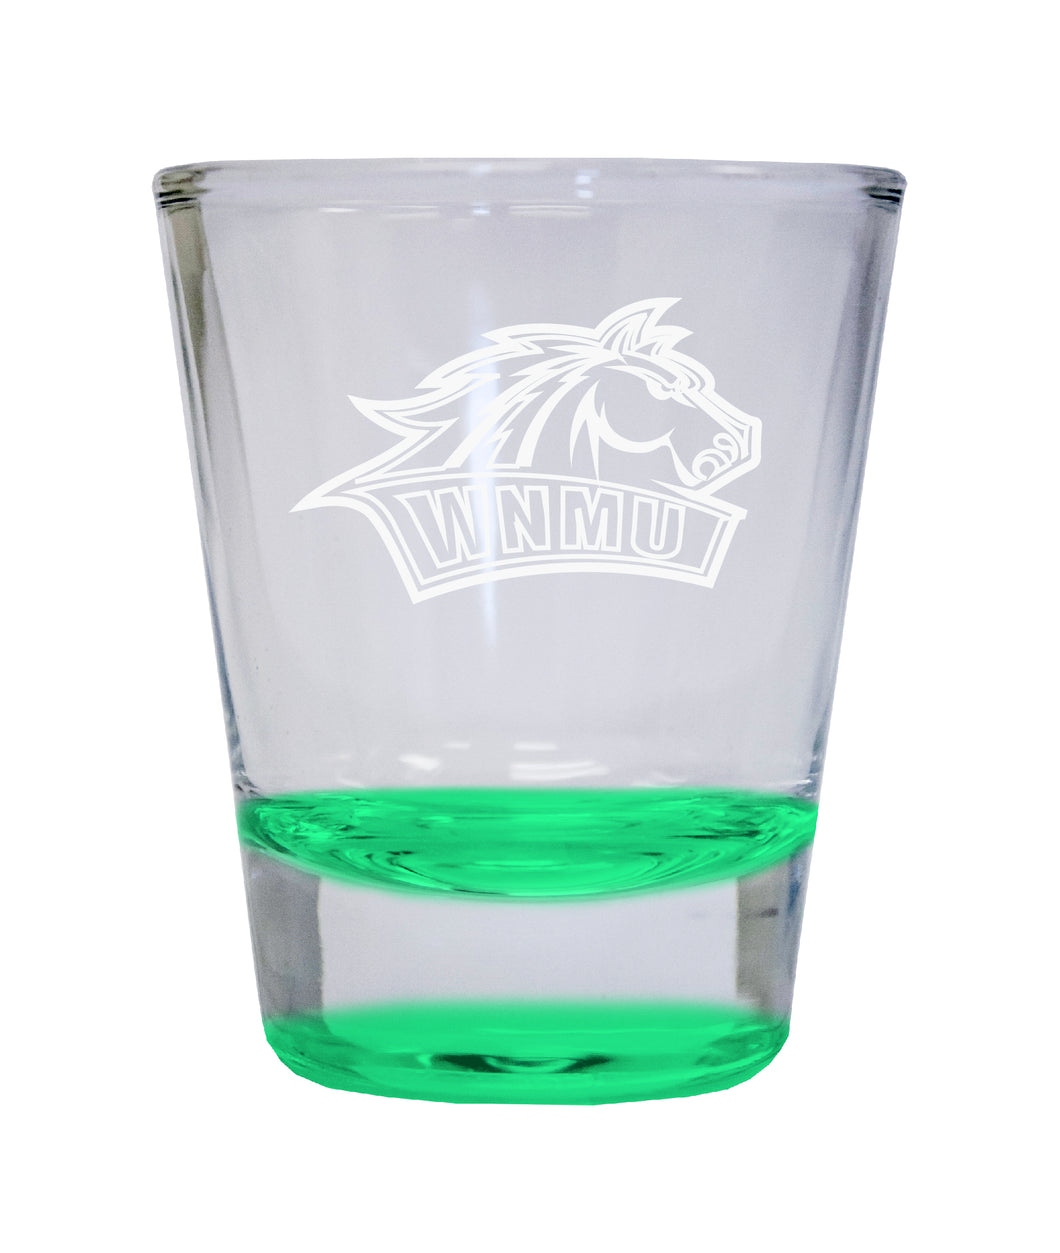 Western New Mexico University Etched Round Shot Glass 2 oz Green